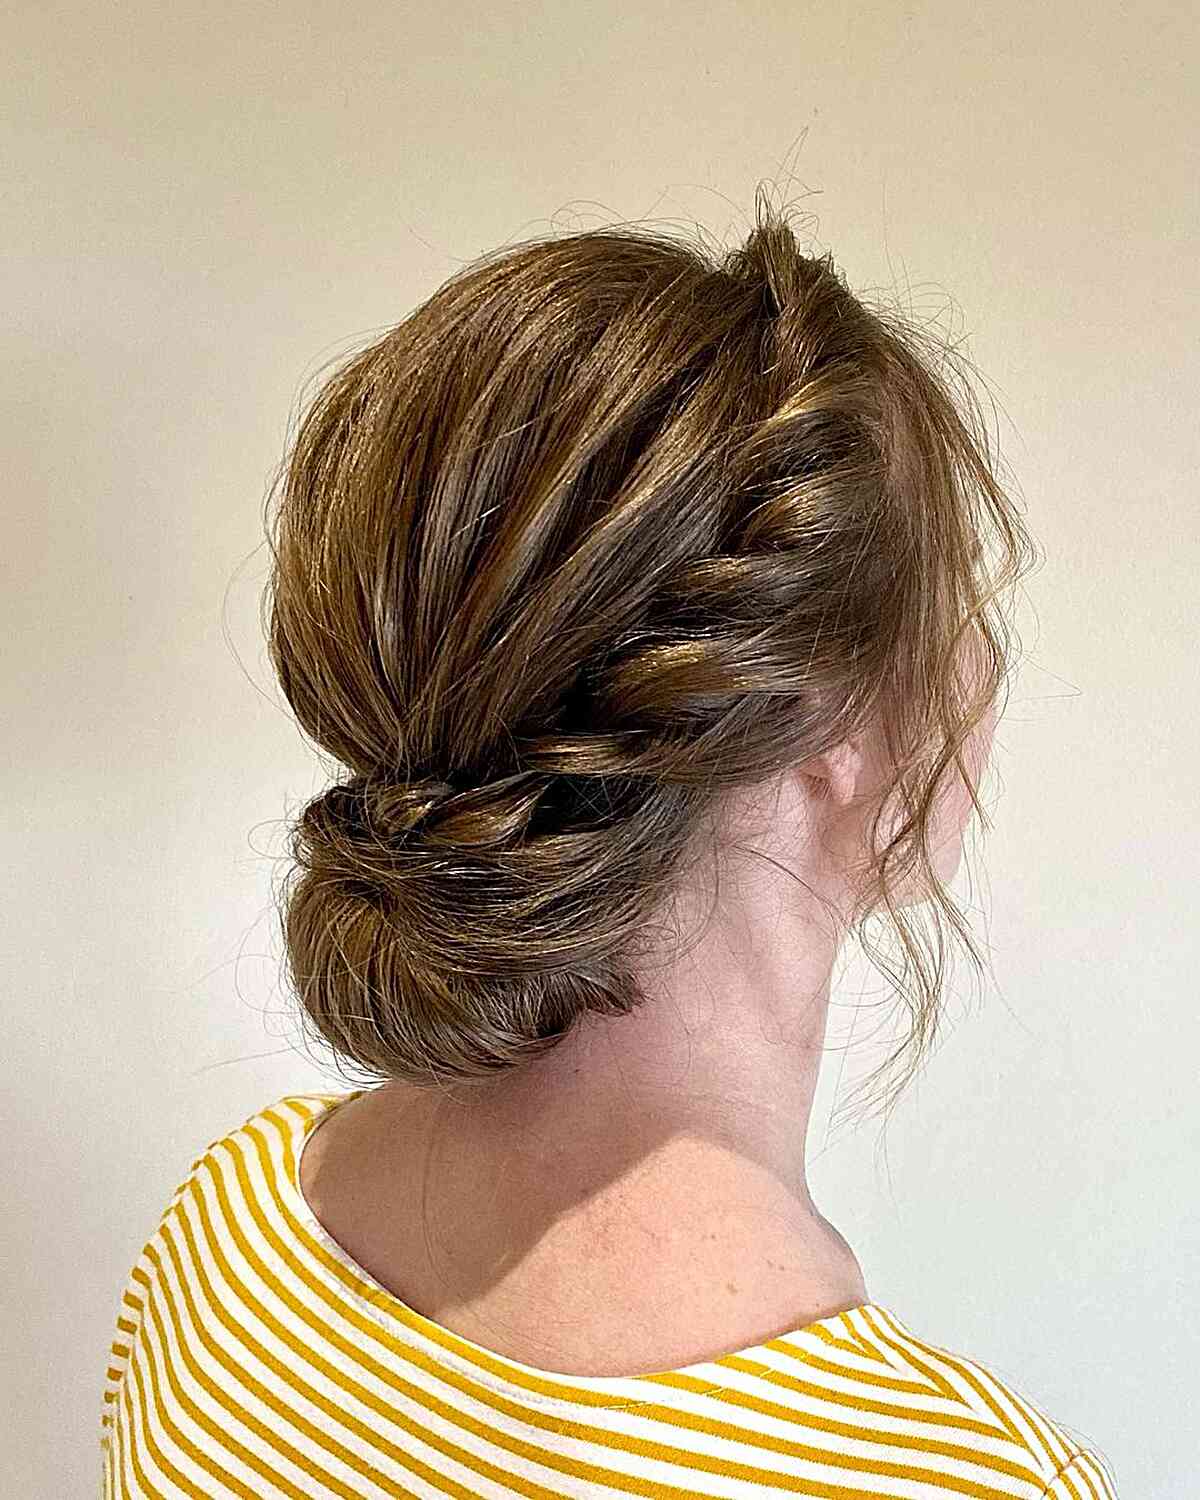 21 Easy Prom Hairstyles for 2023 You Have to See